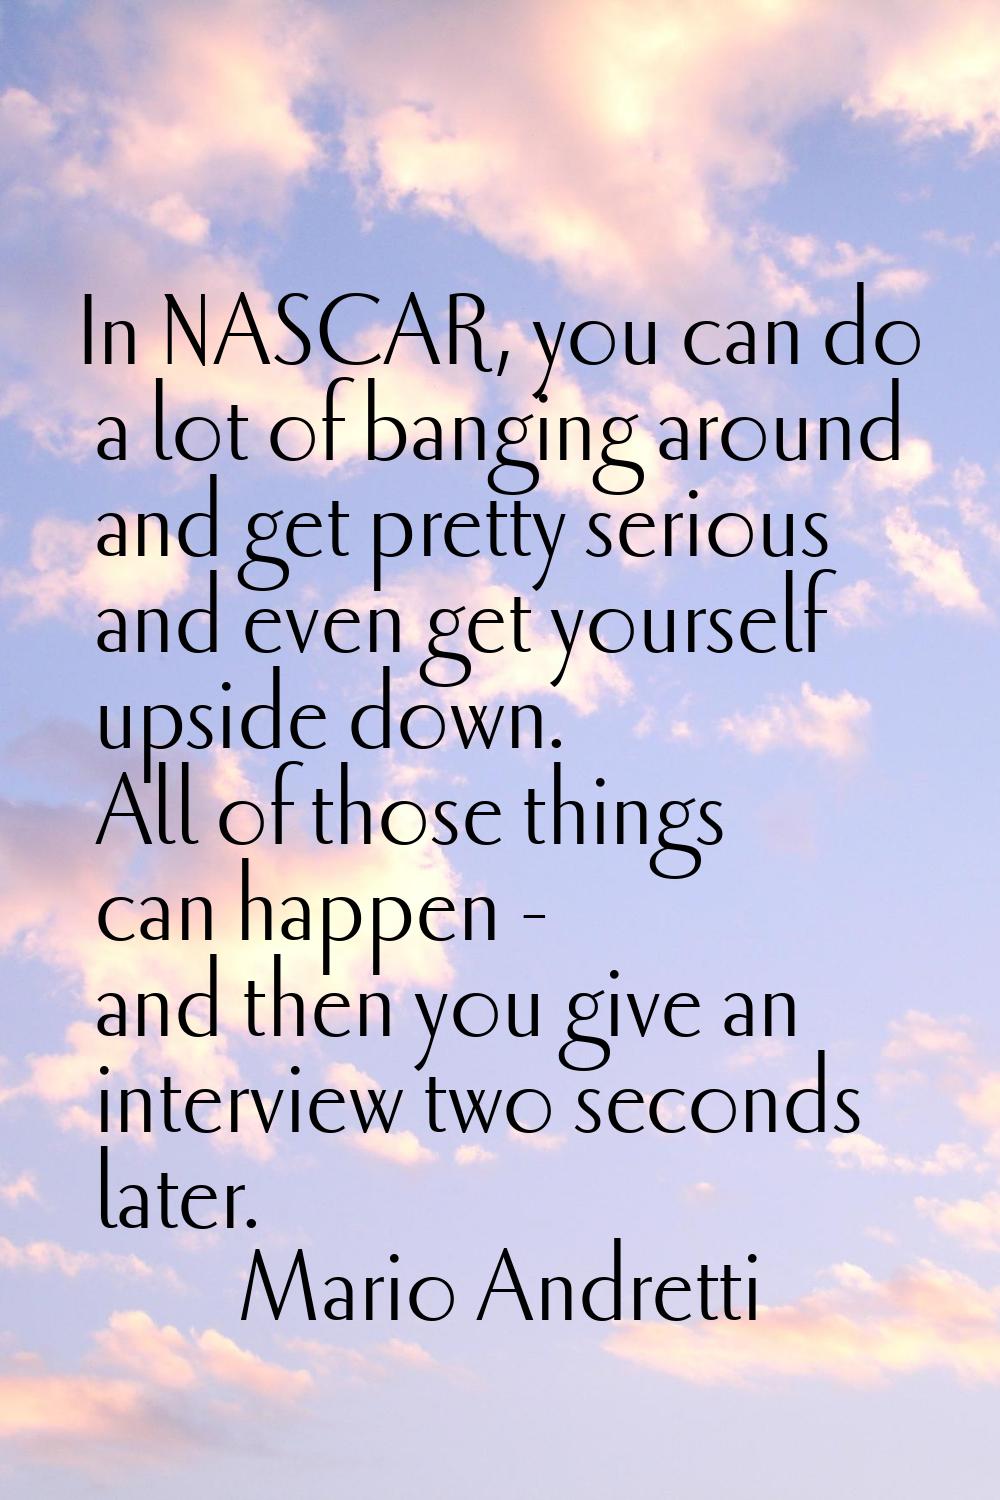 In NASCAR, you can do a lot of banging around and get pretty serious and even get yourself upside d